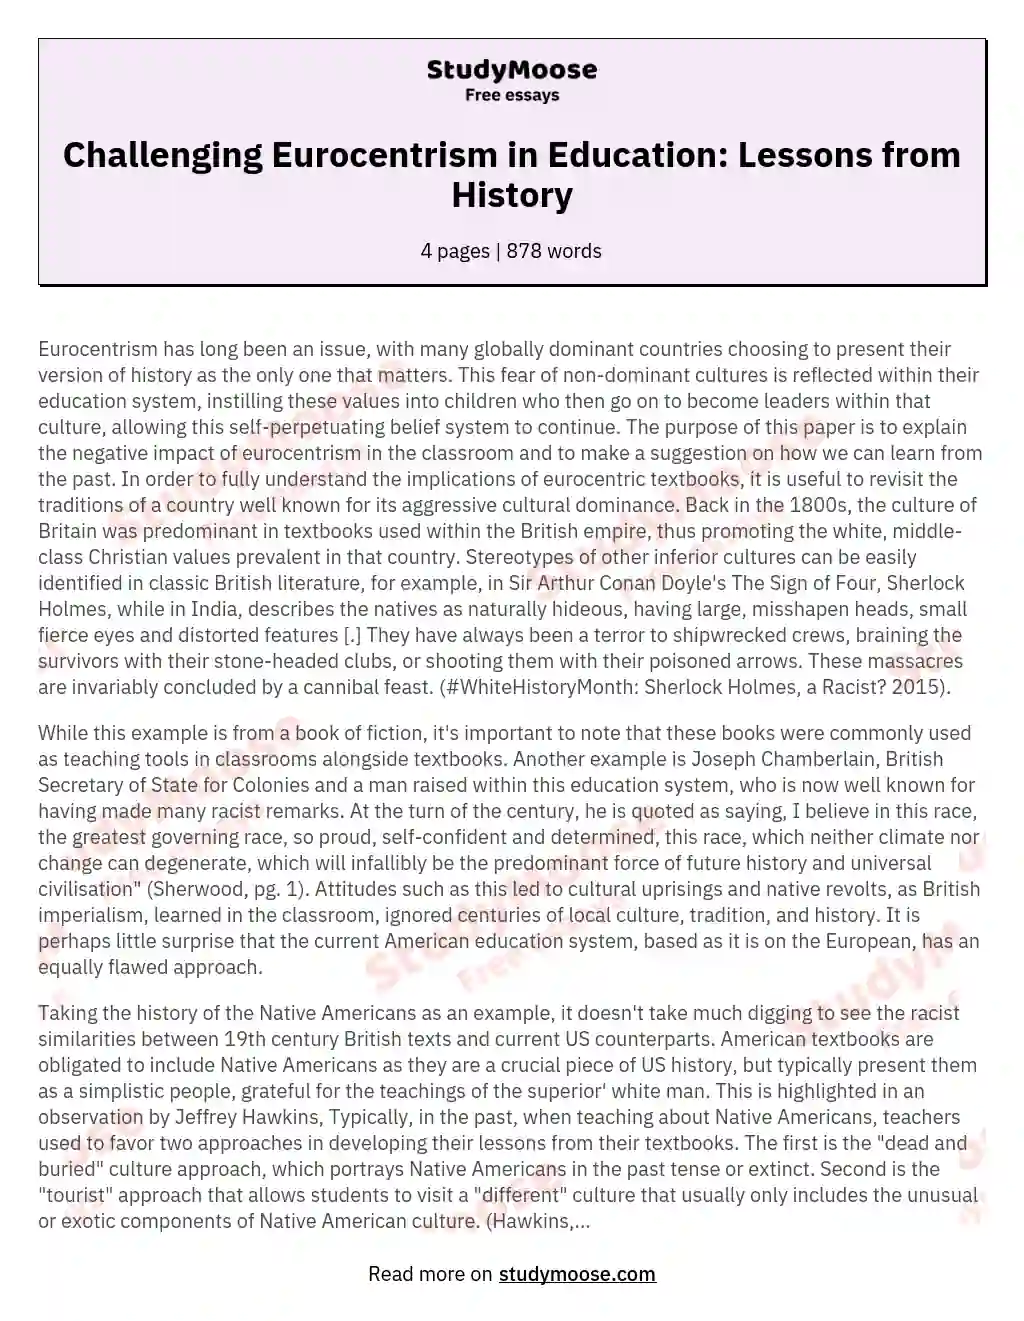 Challenging Eurocentrism in Education: Lessons from History essay